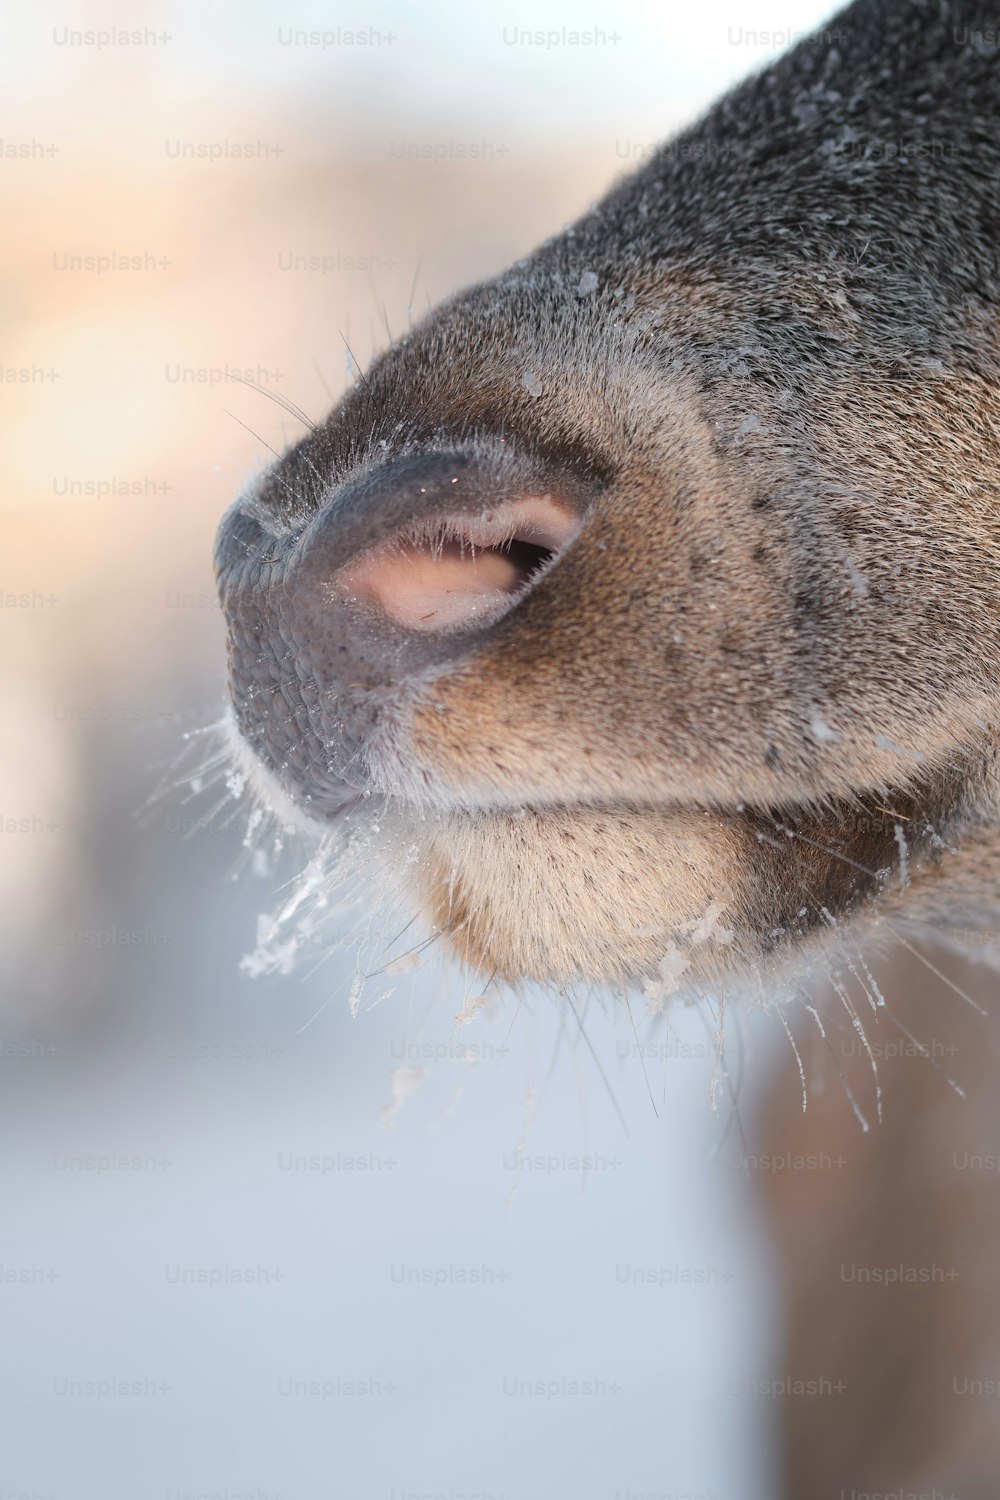 a close up of the nose of a deer